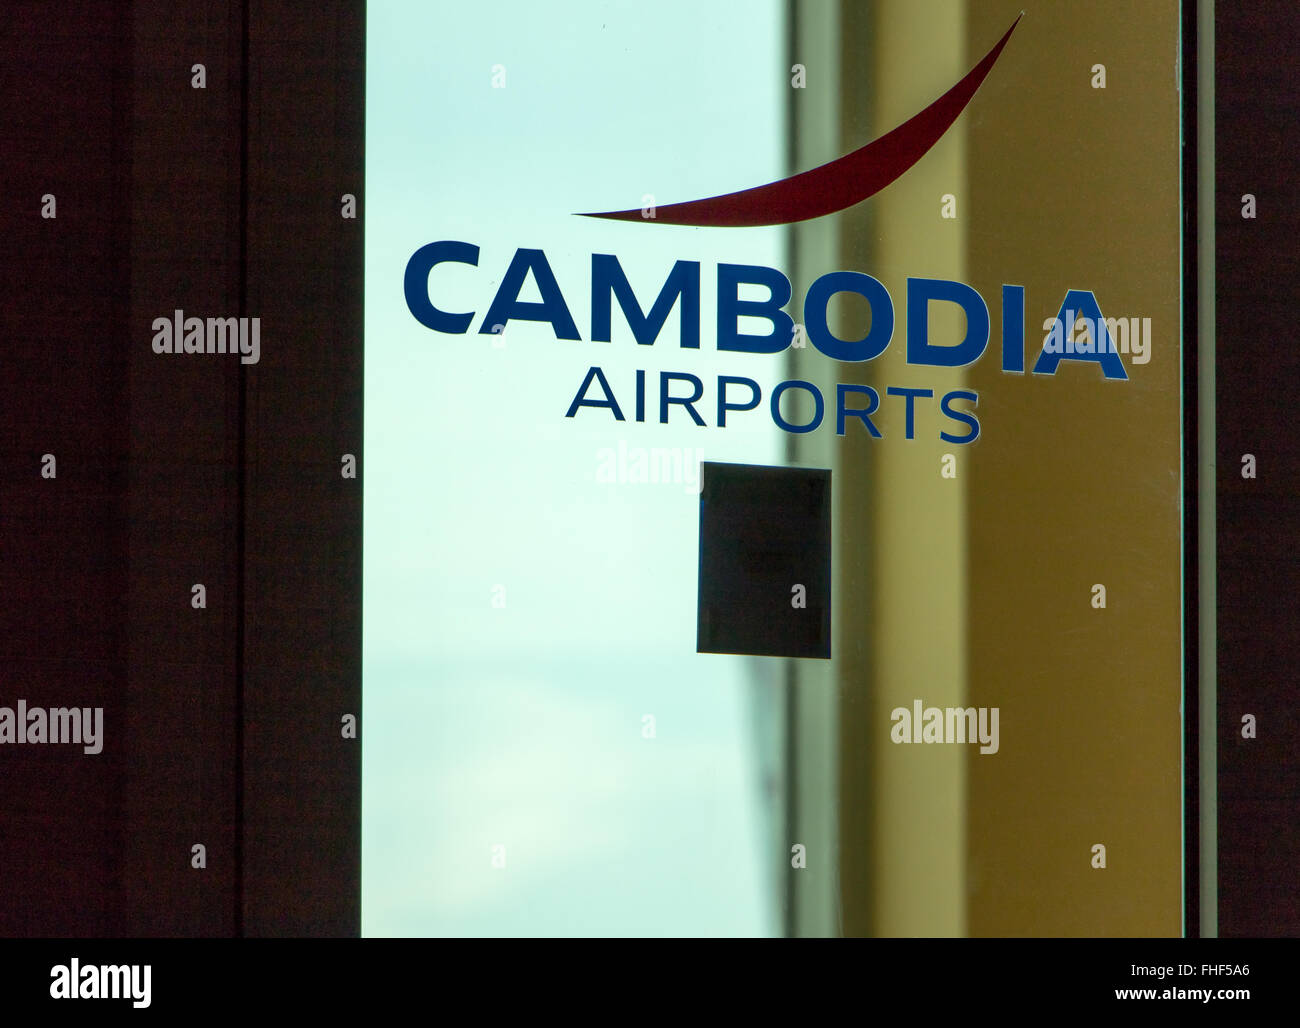 symbol with text airport Cambodia on door Stock Photo